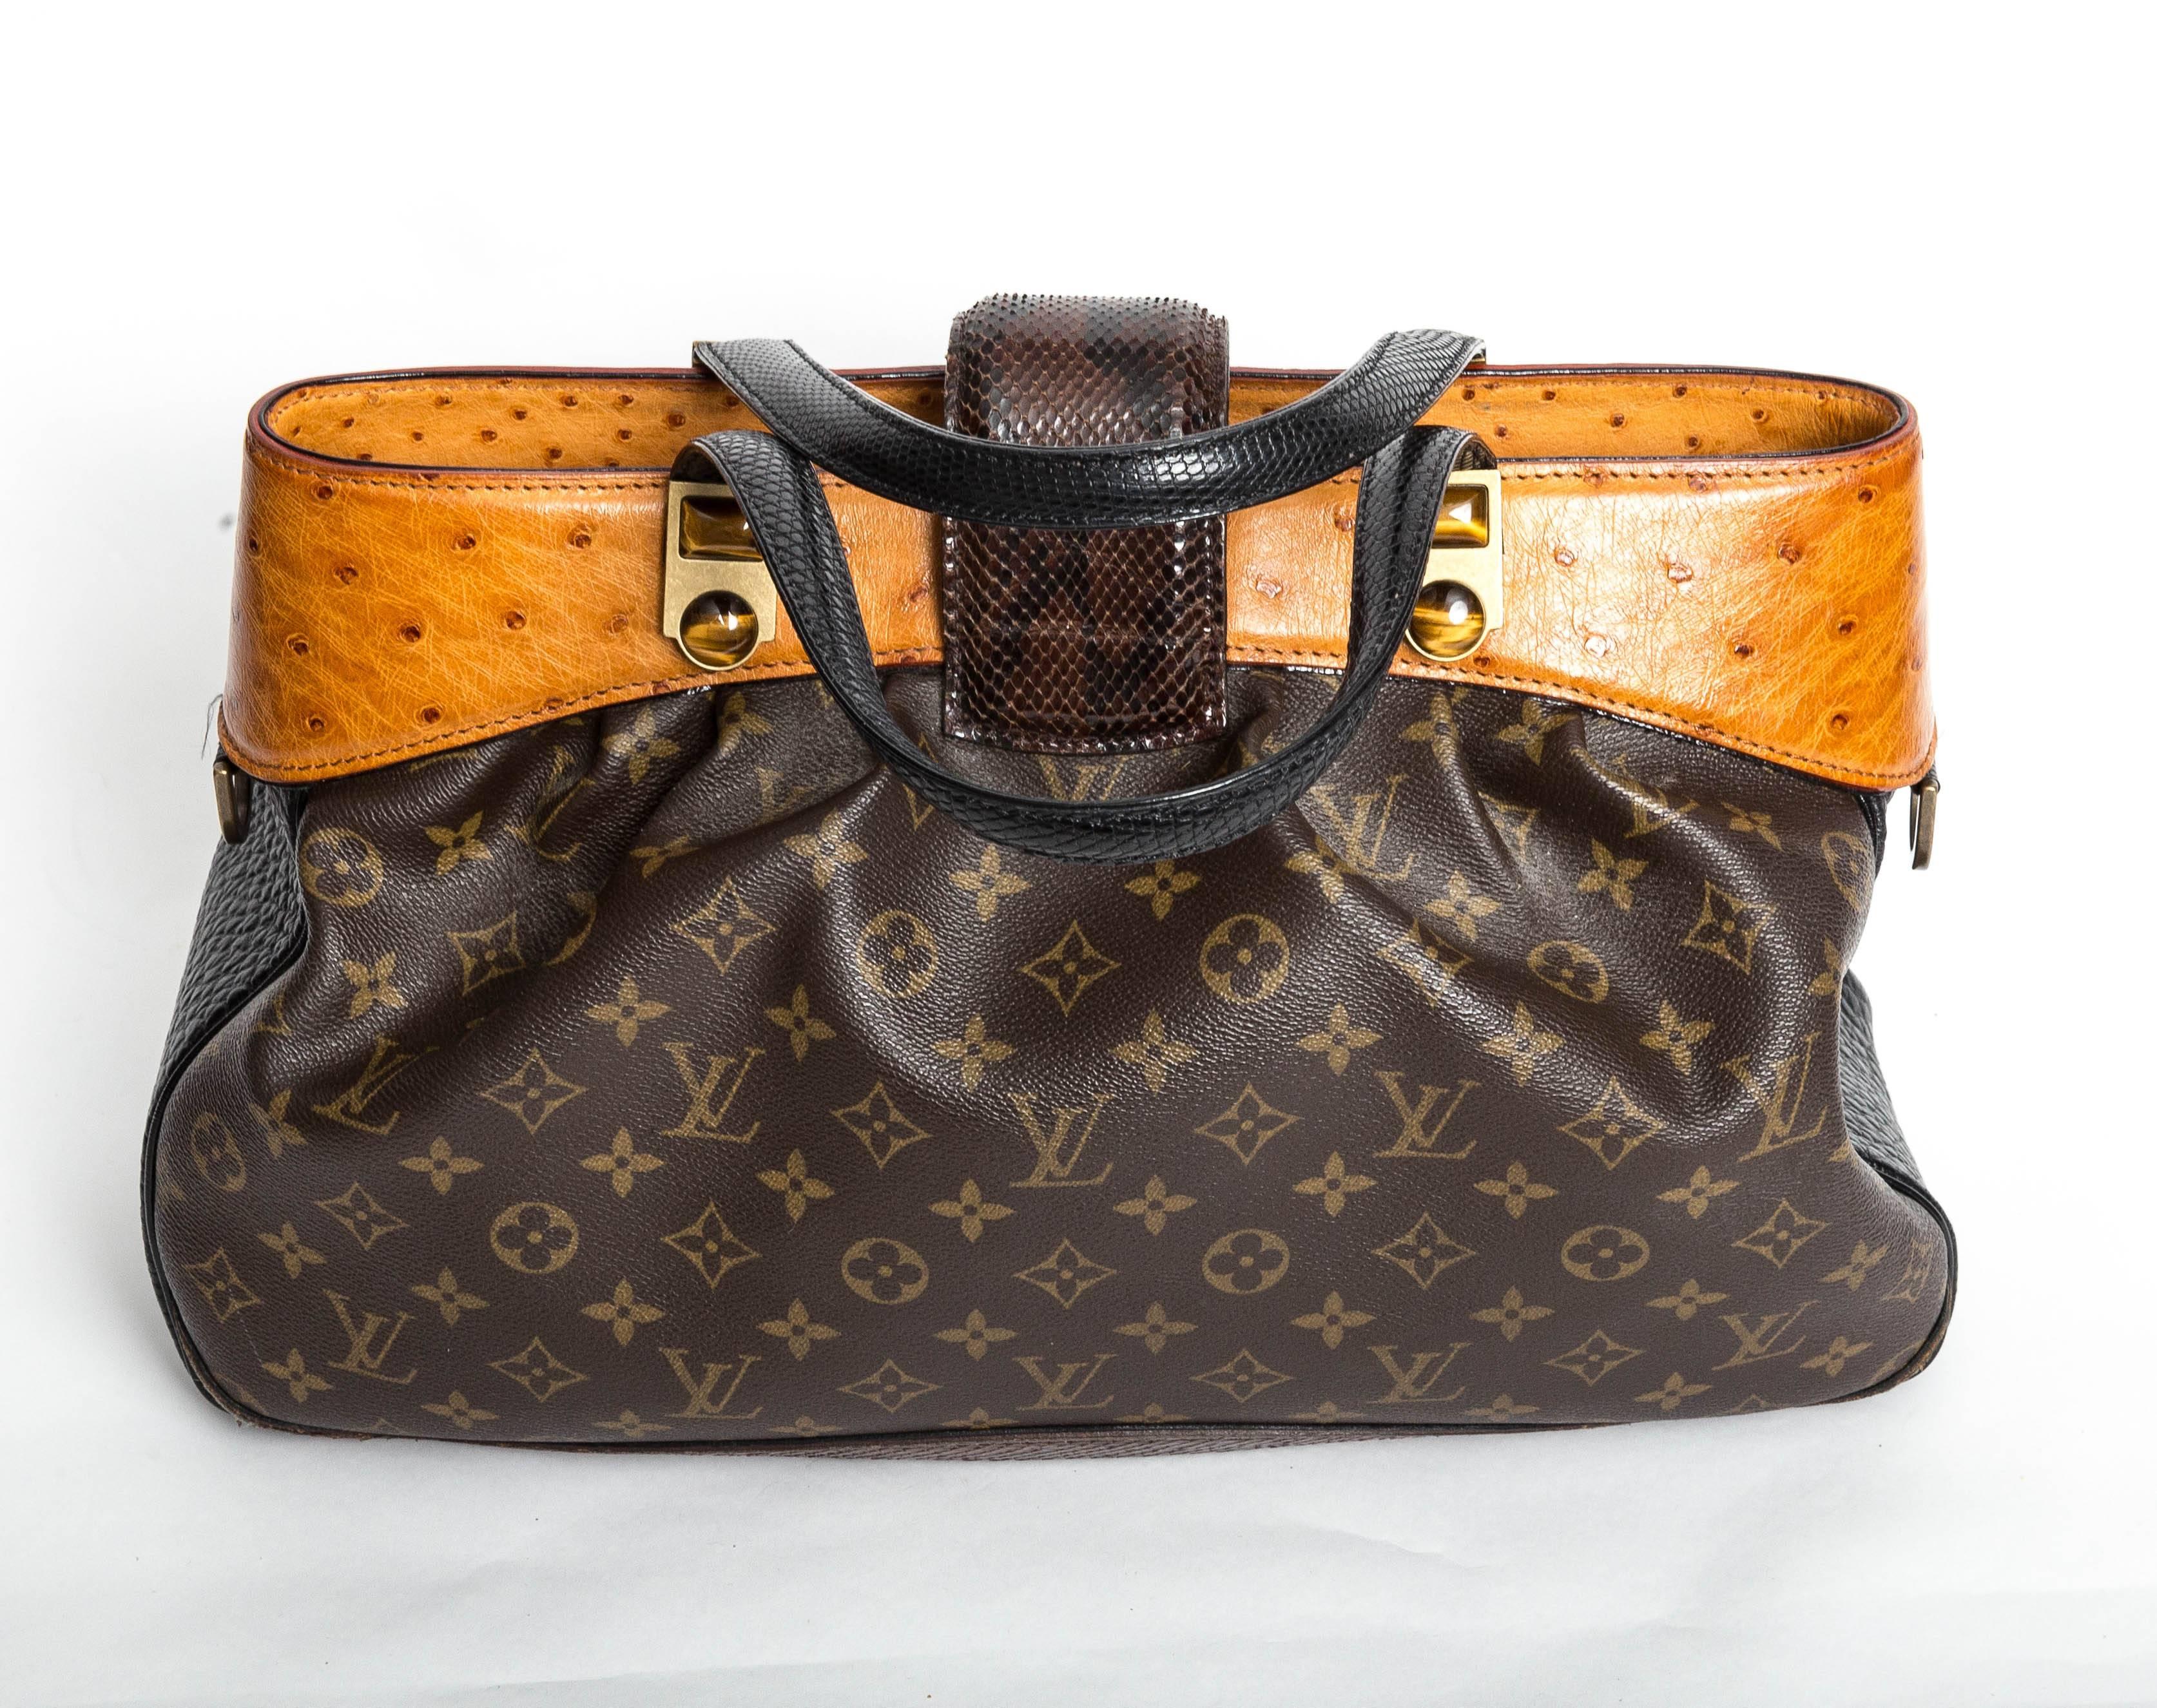 Fabulous Louis Vuitton Limited Edition Oskar Waltz Handbag in Excellent Condition.
From Louis Vuitton's 2005 Fall/Winter Runway Collection, and seen on the arm of Oprah Winfrey, this stunning bag is made of Louis Vuitton's Monogram canvas with